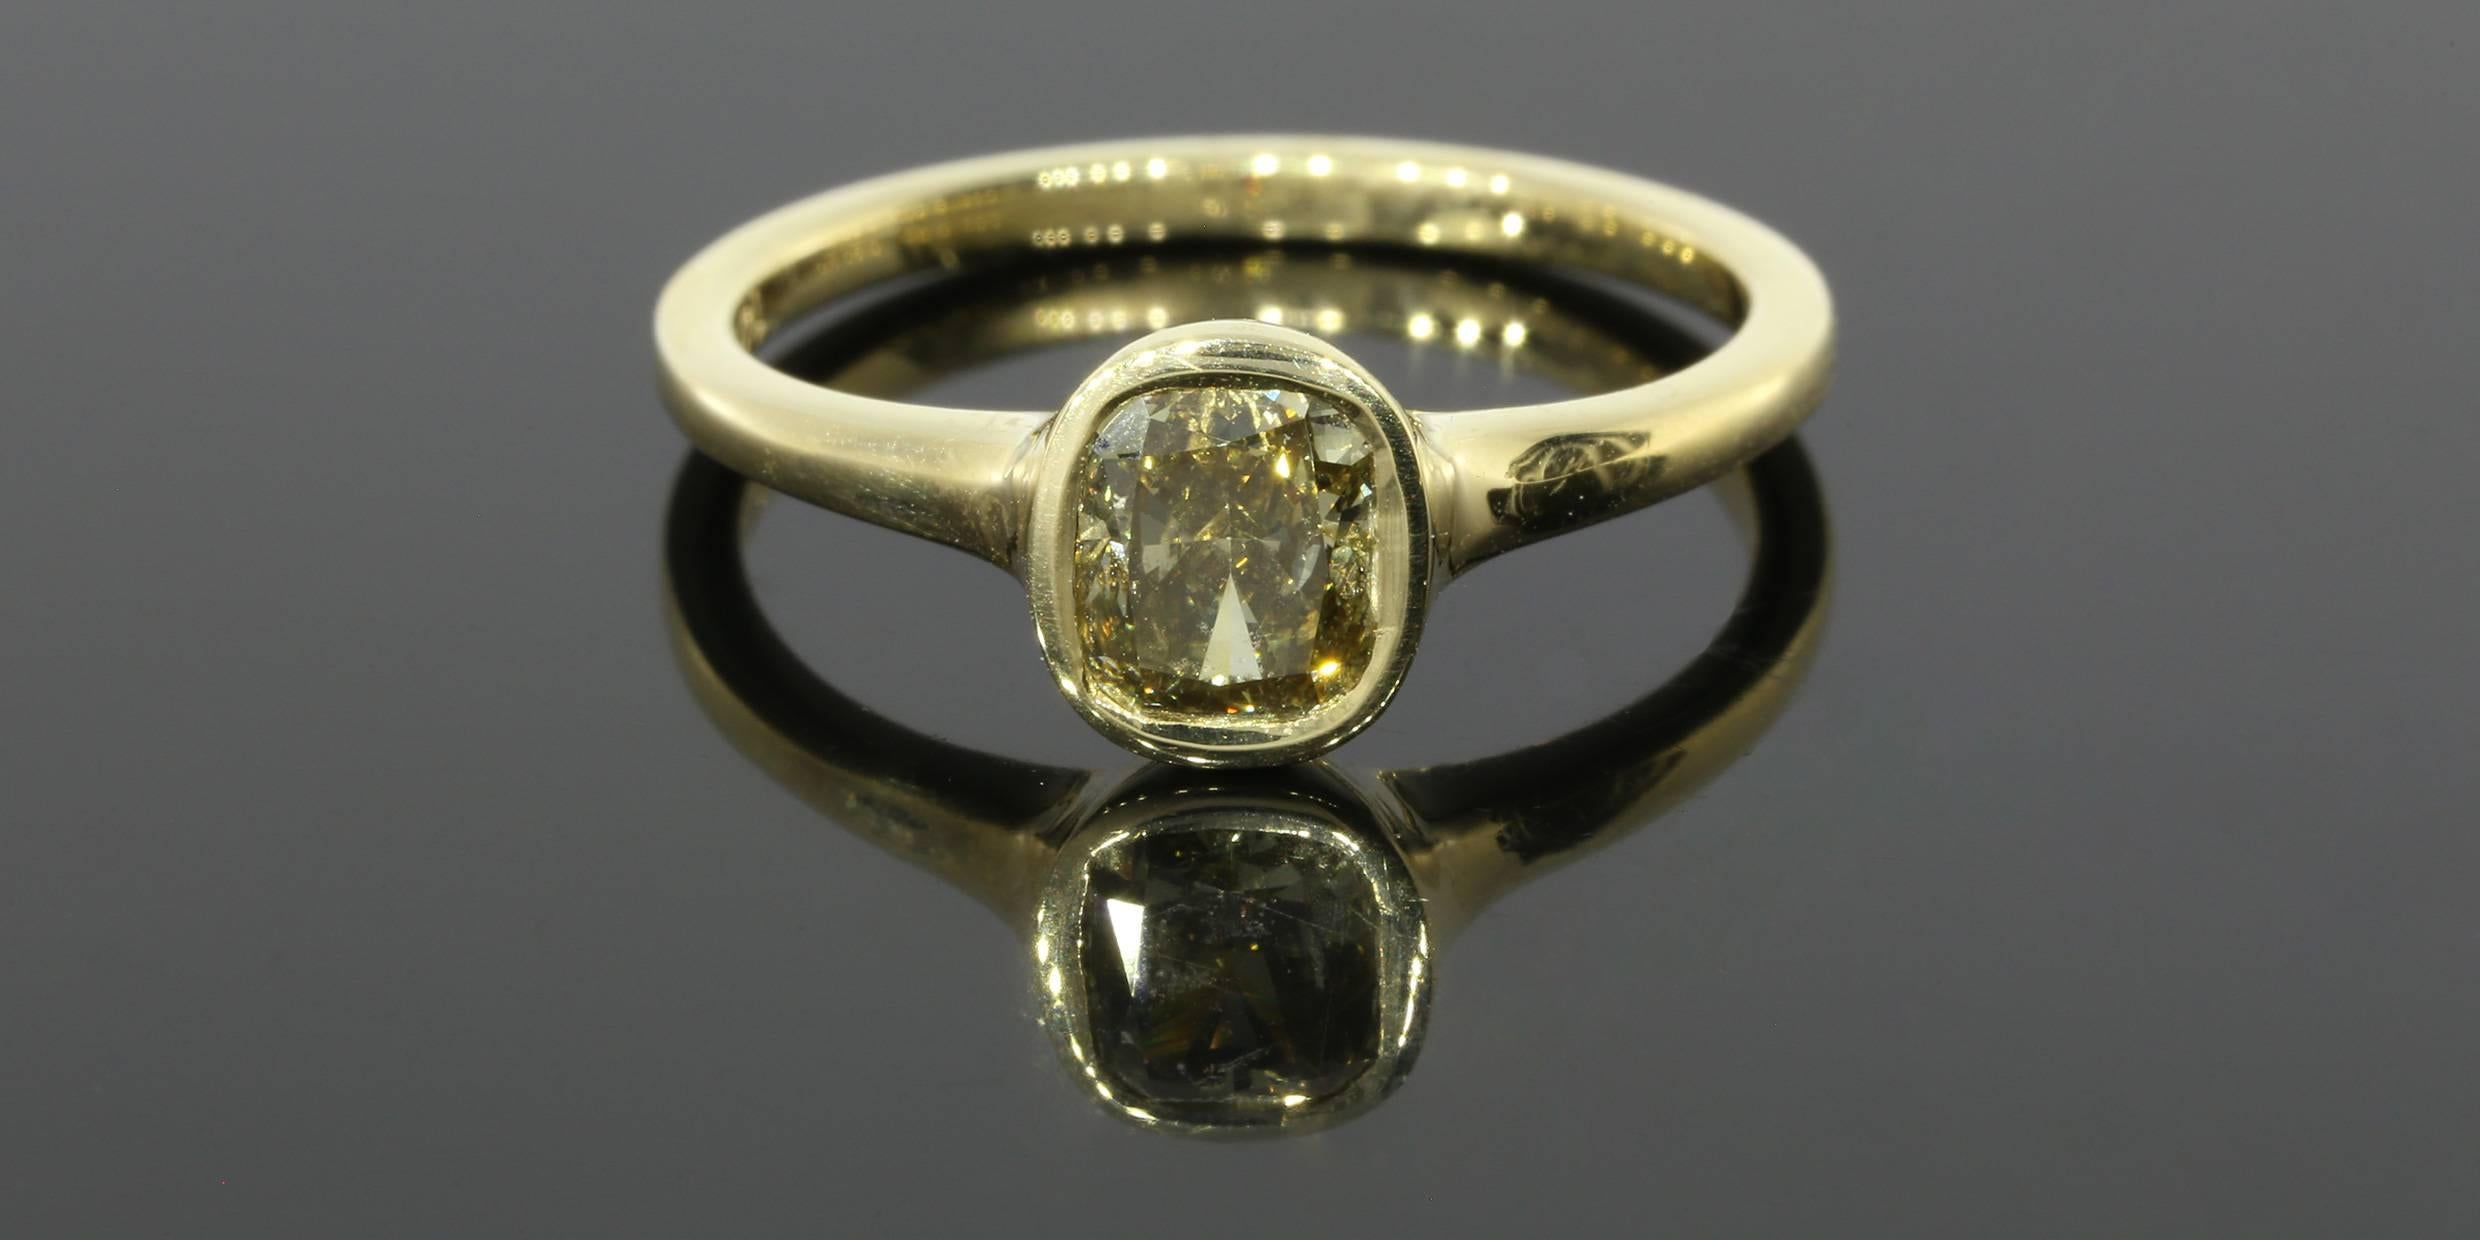 The ring features one cushion cut diamond weighing 1.01 carats. The diamond is certified through the Gemological Institute of America and has a lab report, number 5172319227. The diamond is graded as a dark brown/green/yellow in color and SI2 in